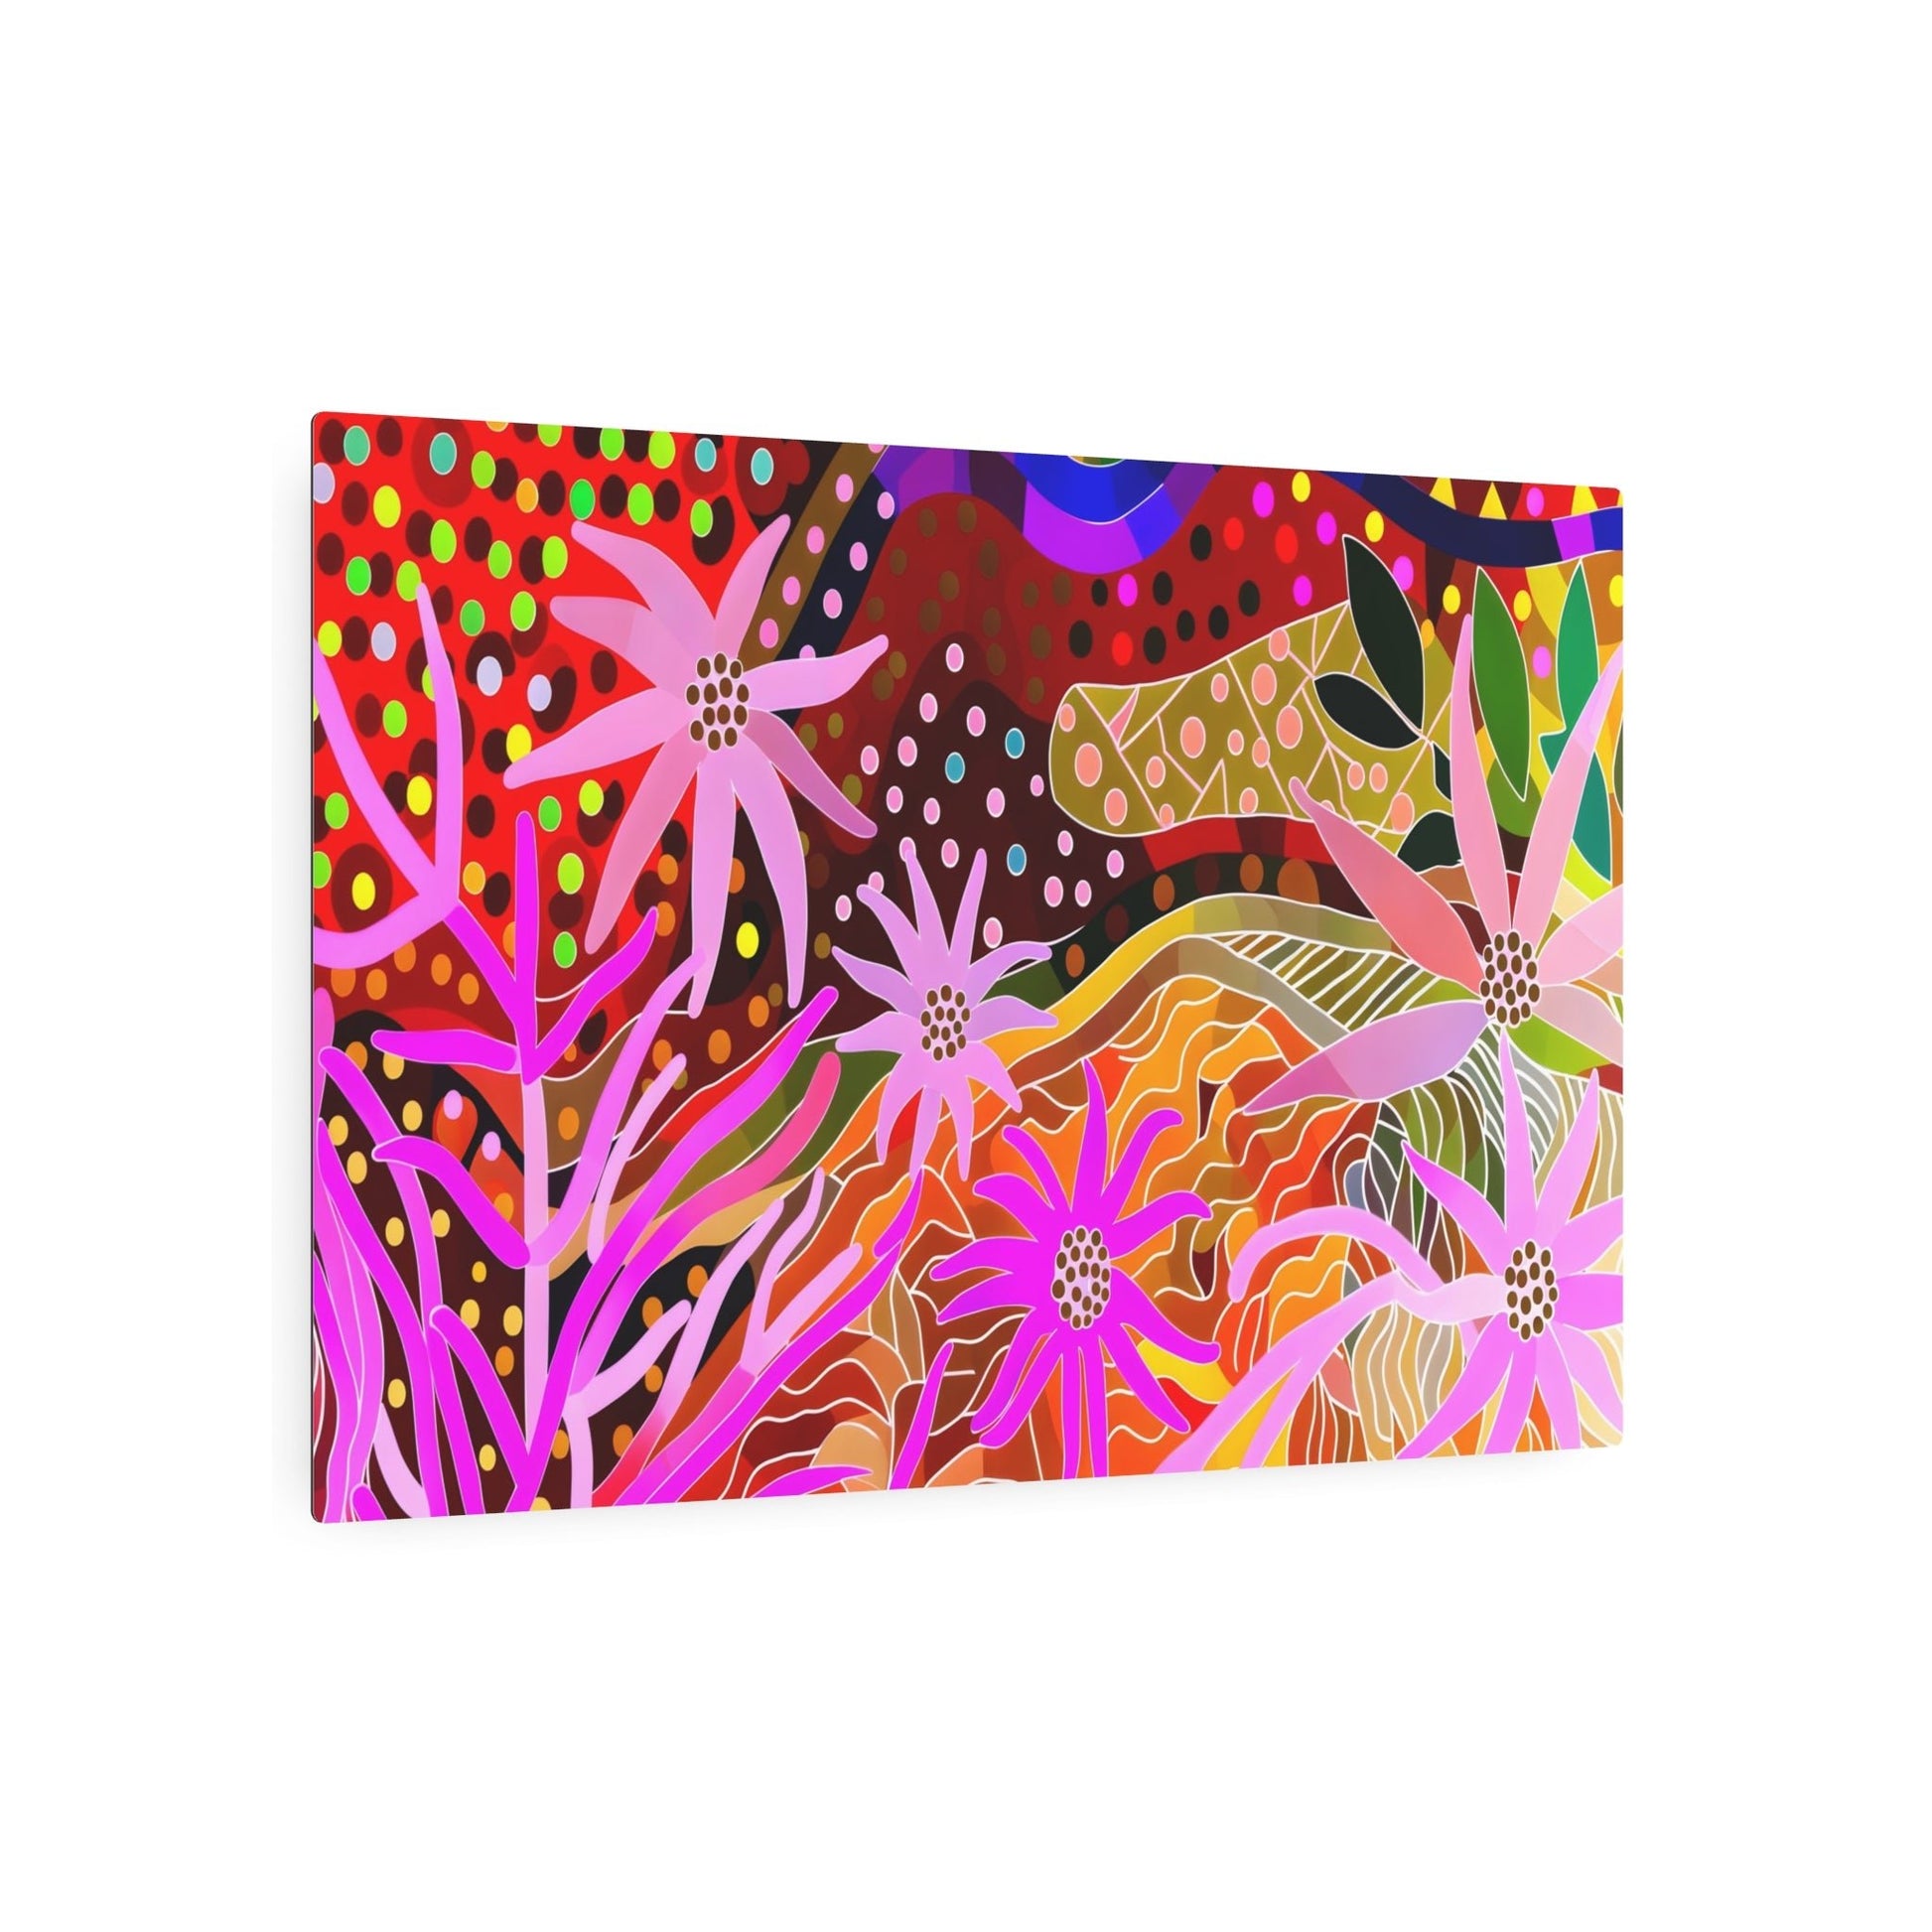 Metal Poster Art | "Vibrant Australian Aboriginal Art - Dreamtime Scene with Wildflowers, Geometric Shapes, Curved Forms in Bold Colors - Non-Western Global - Metal Poster Art 36″ x 24″ (Horizontal) 0.12''